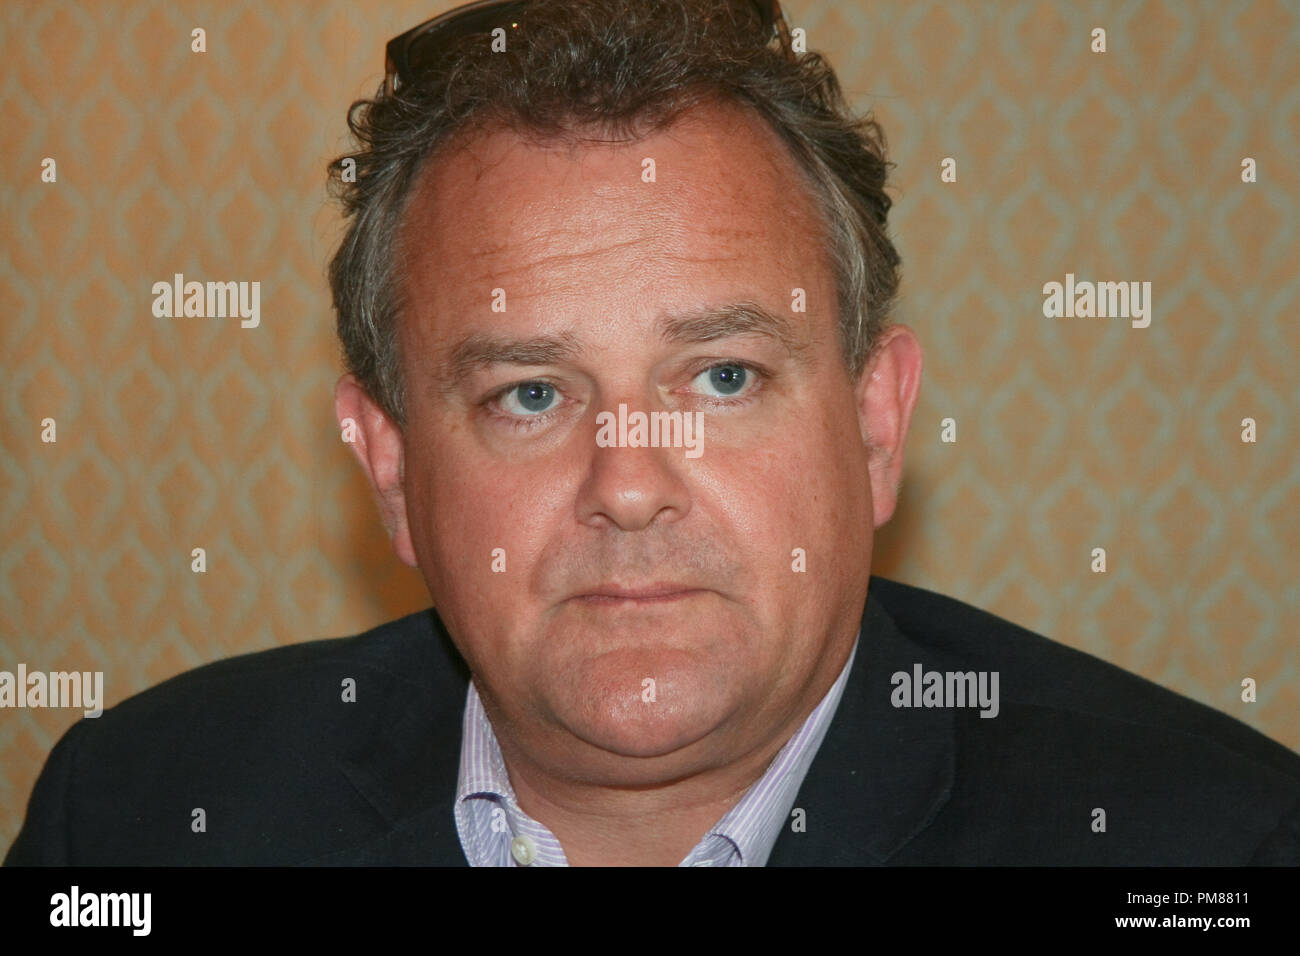 Hugh Bonneville   'Downton Abbey'  Portrait Session, July 22, 2012.  Reproduction by American tabloids is absolutely forbidden. File Reference # 31610 052JRC  For Editorial Use Only -  All Rights Reserved Stock Photo